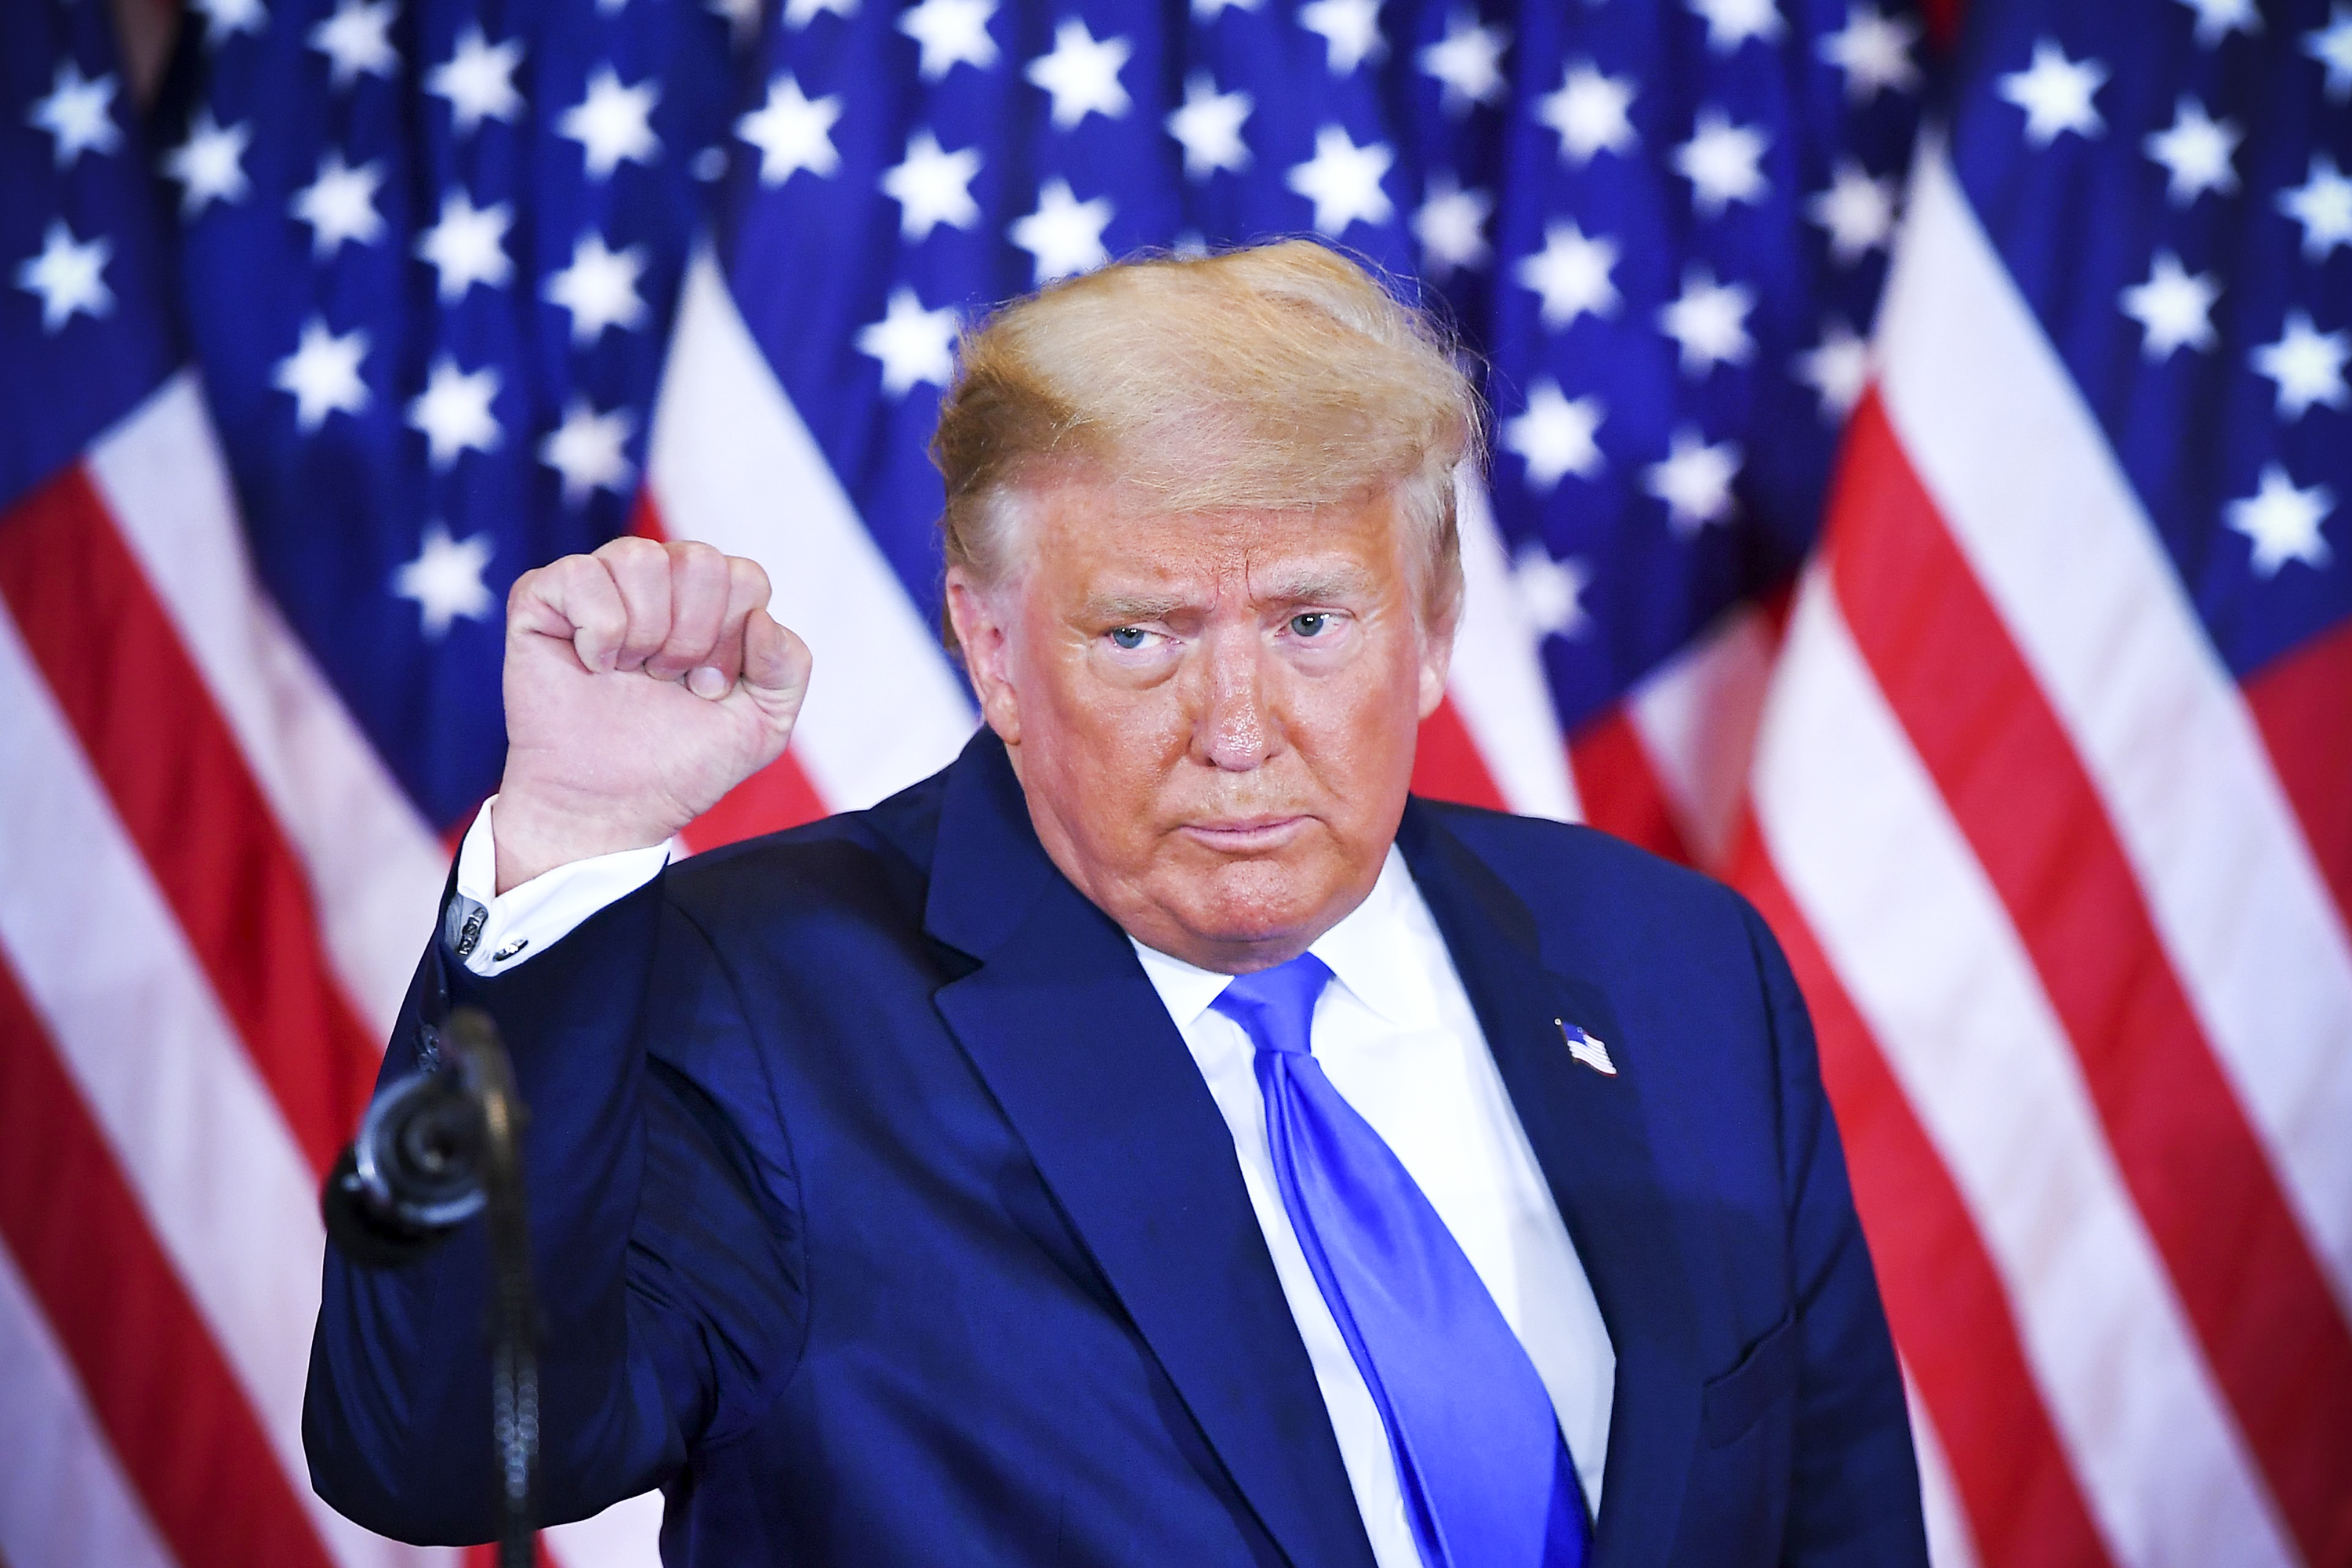 President Donald Trump, standing in front of American flags, raises his hand in a fist.